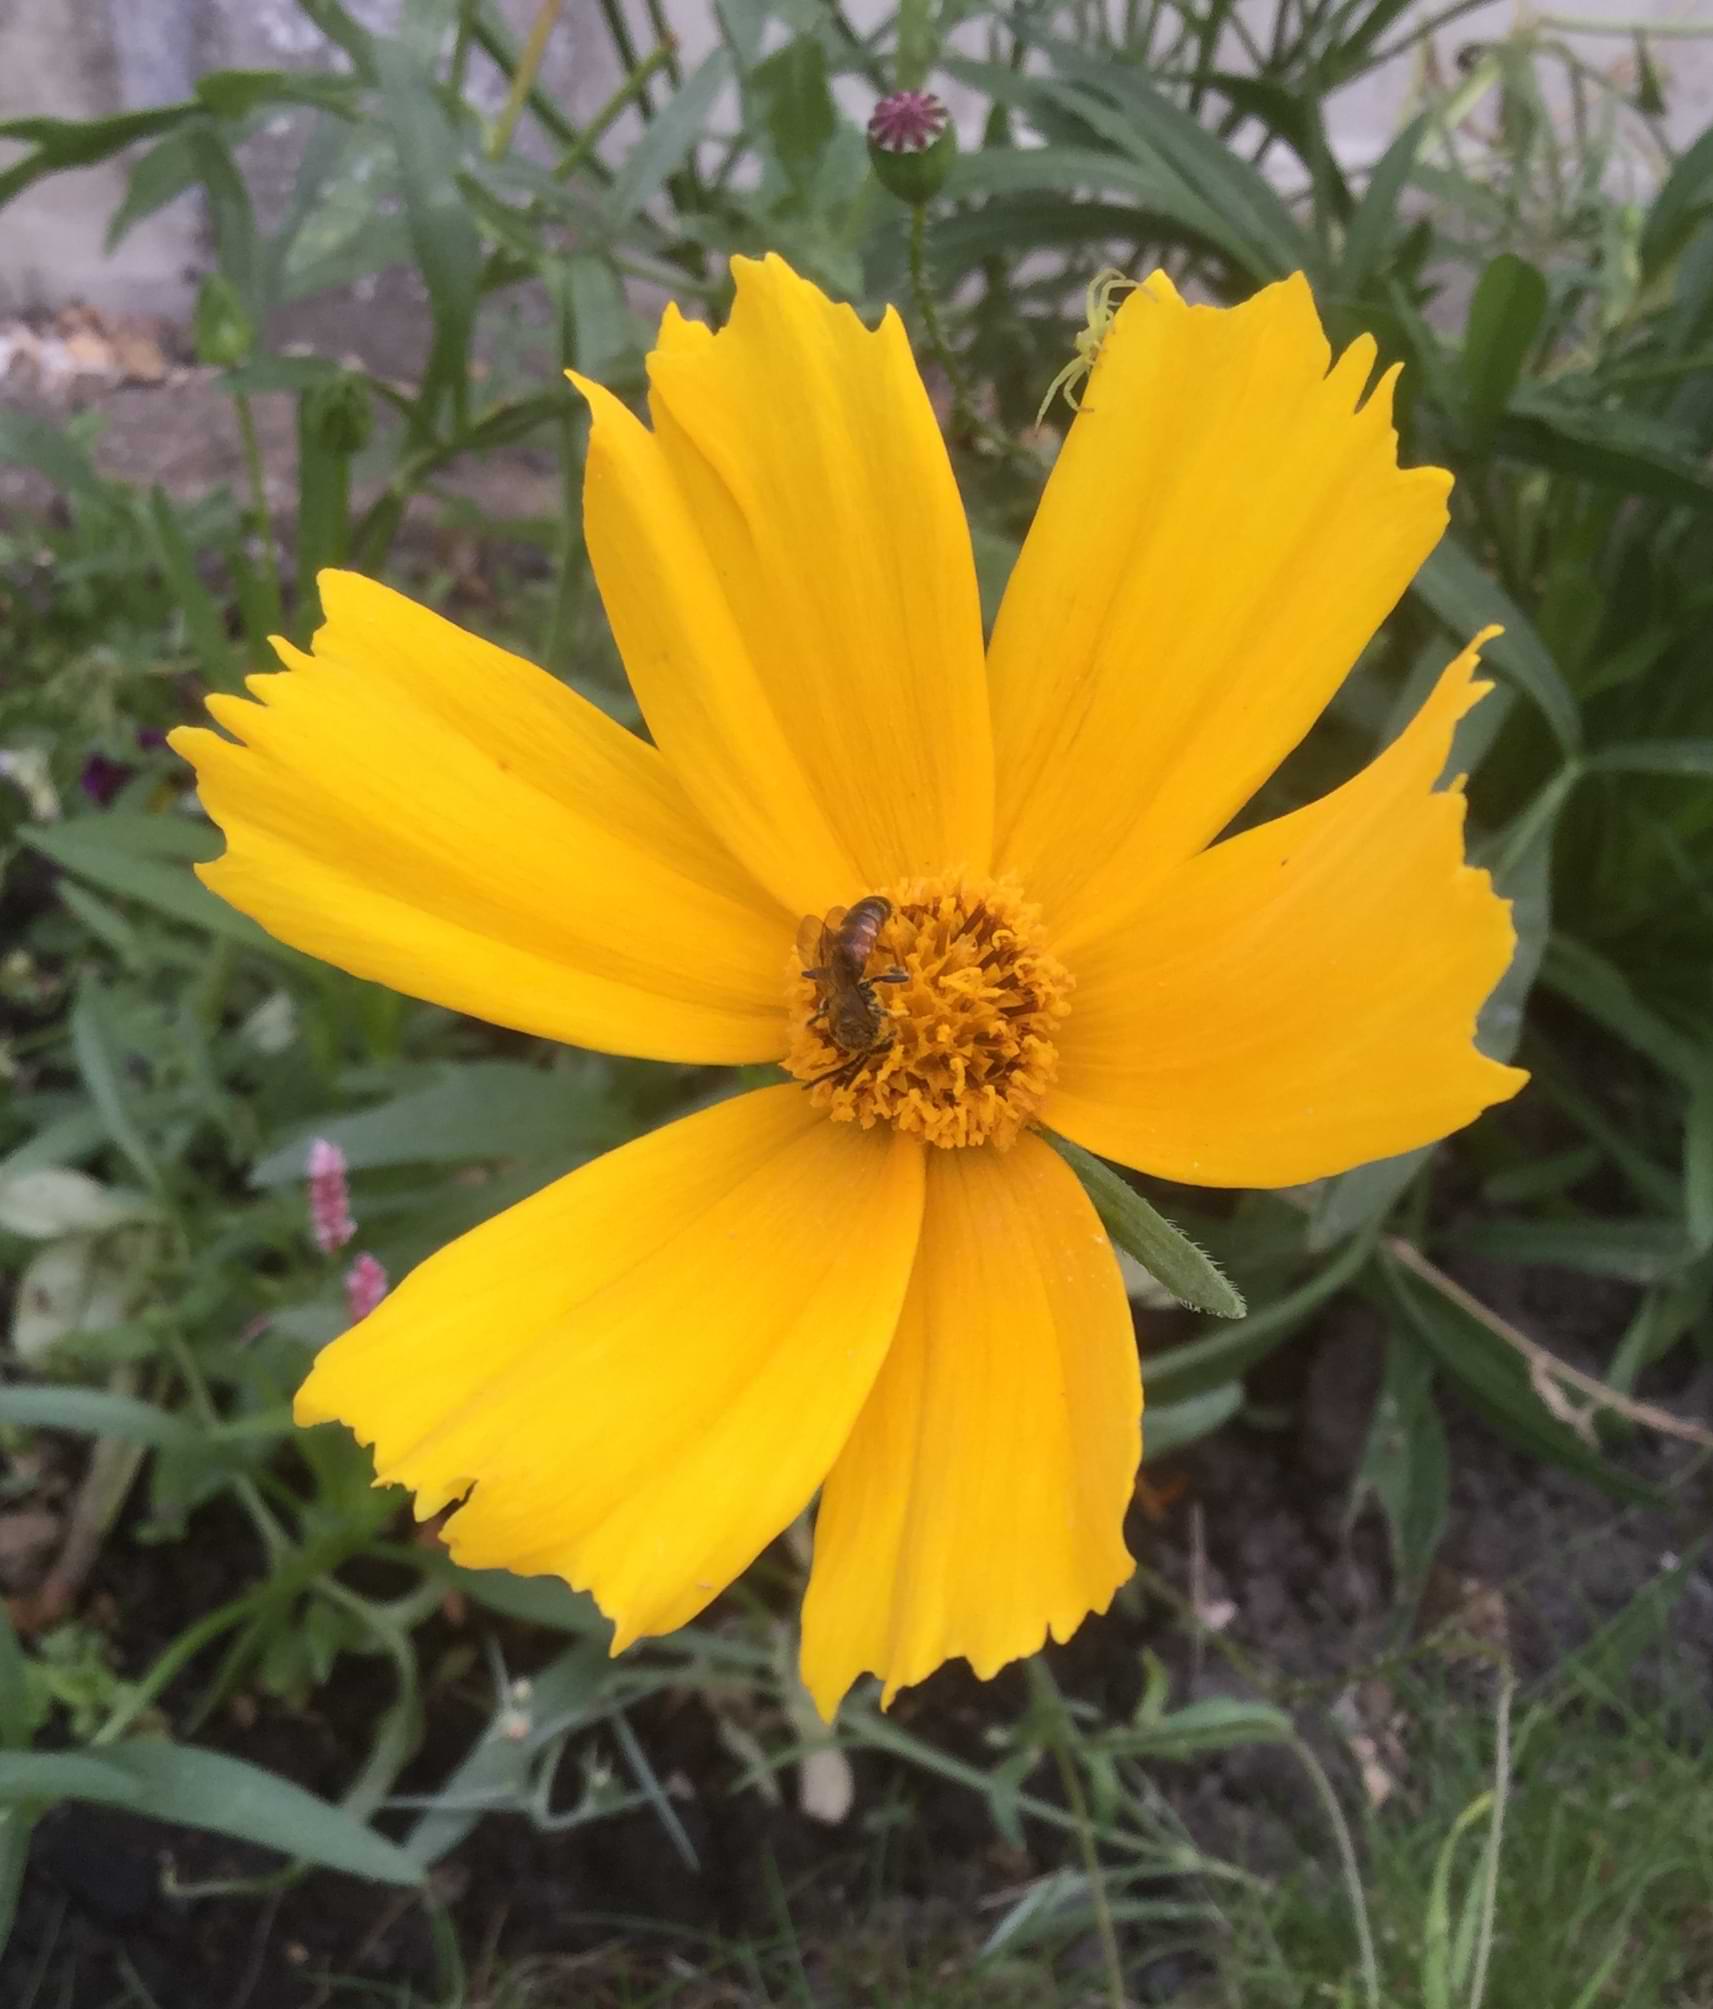 A zoomed out photo of the previous flower. Sitting in the middle is a small dark bee or wasp that has small yellow stripes running across its abdomen. Hiding on the very edge of one petal is the flower crab spider looking menacing but also extremely silly.